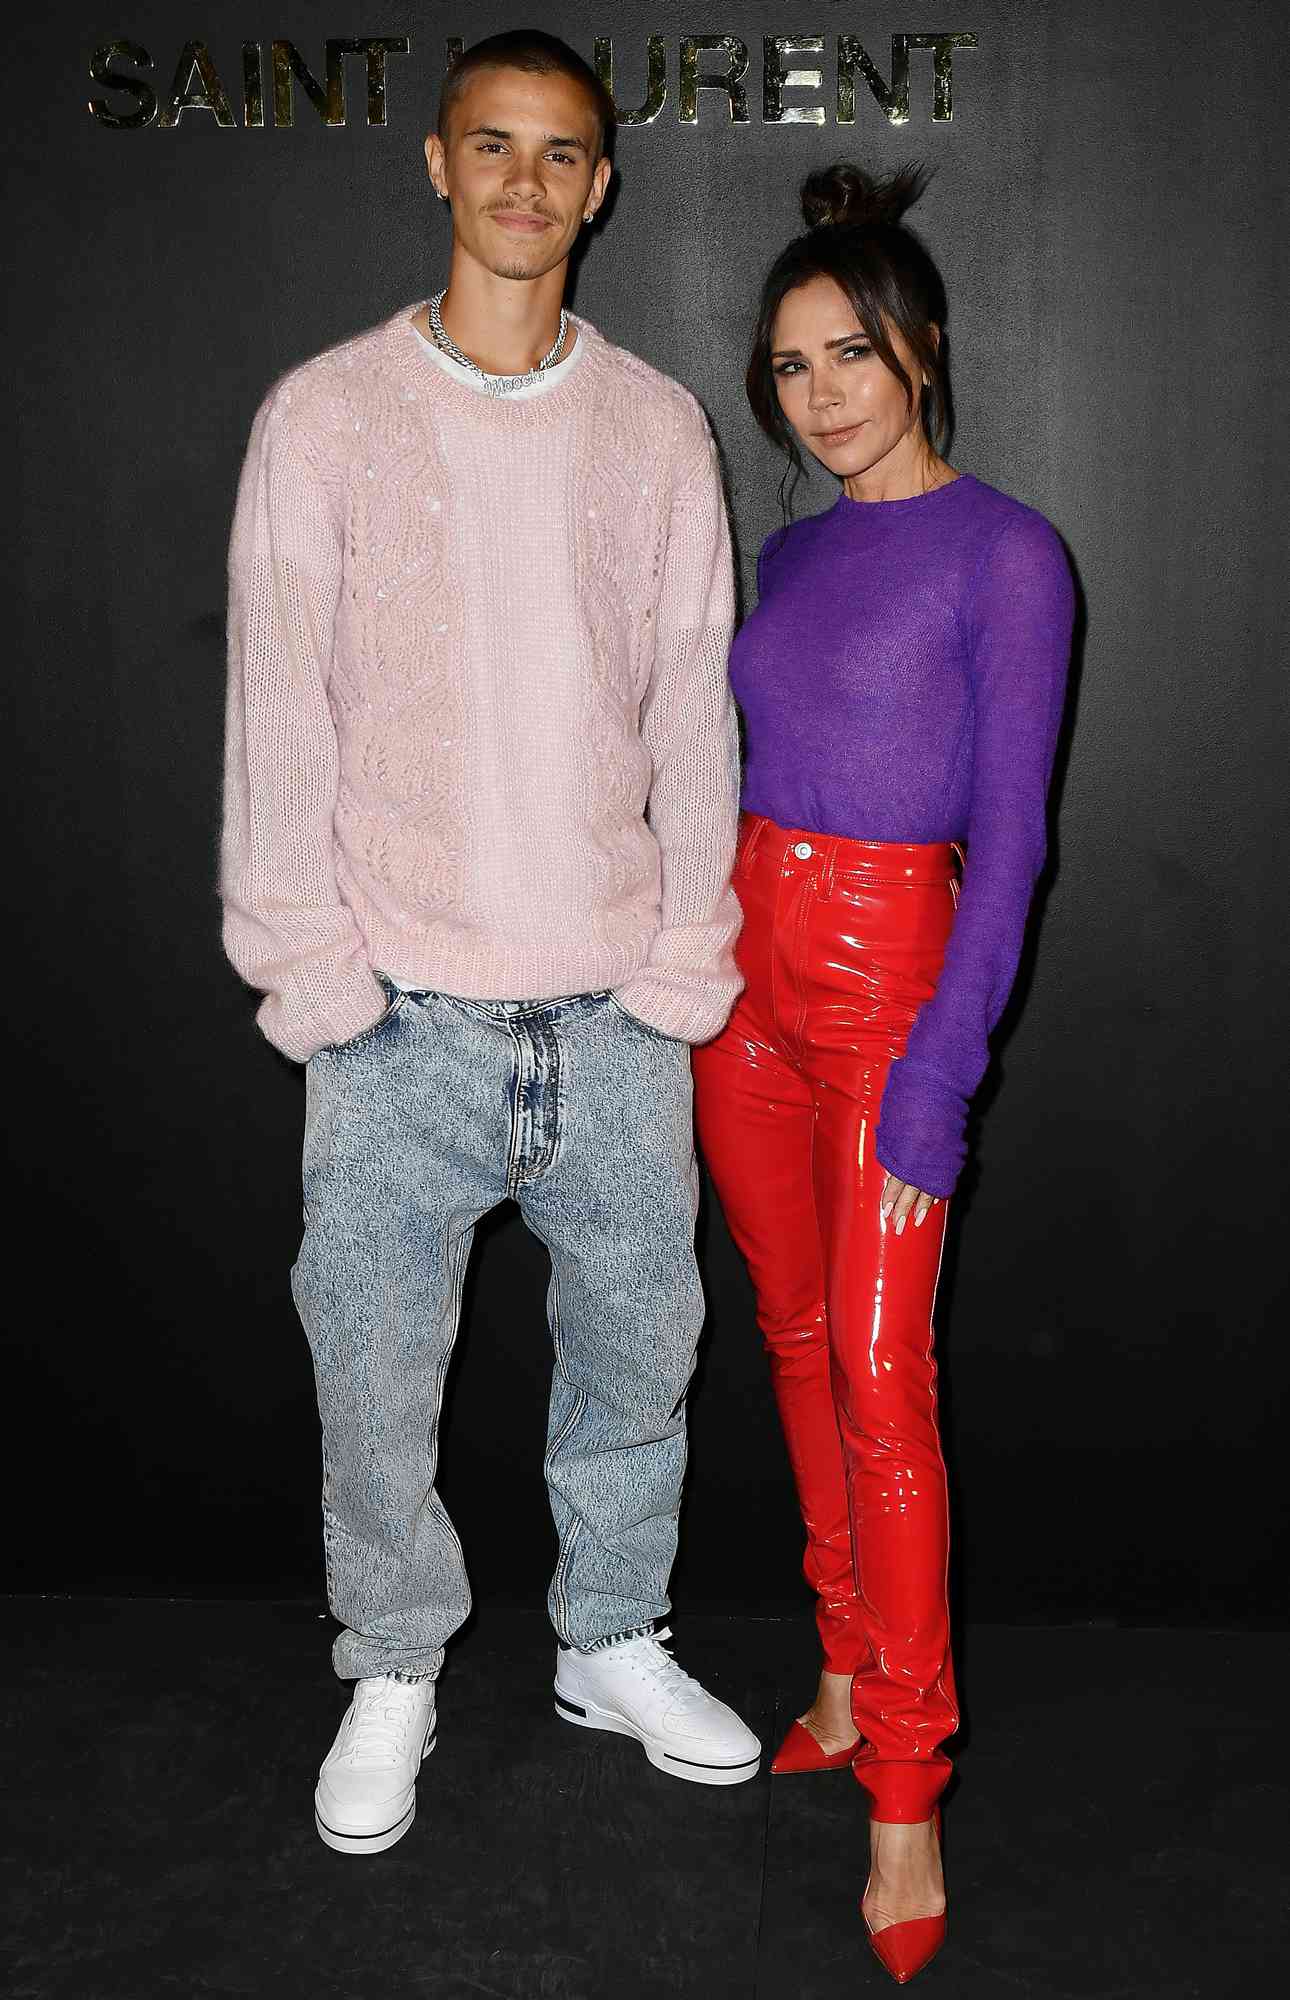 Romeo Beckham and Victoria Beckham attend the Saint-Laurent Womenswear Fall/Winter 2022/2023 show as part of Paris Fashion Week on March 01, 2022 in Paris, France